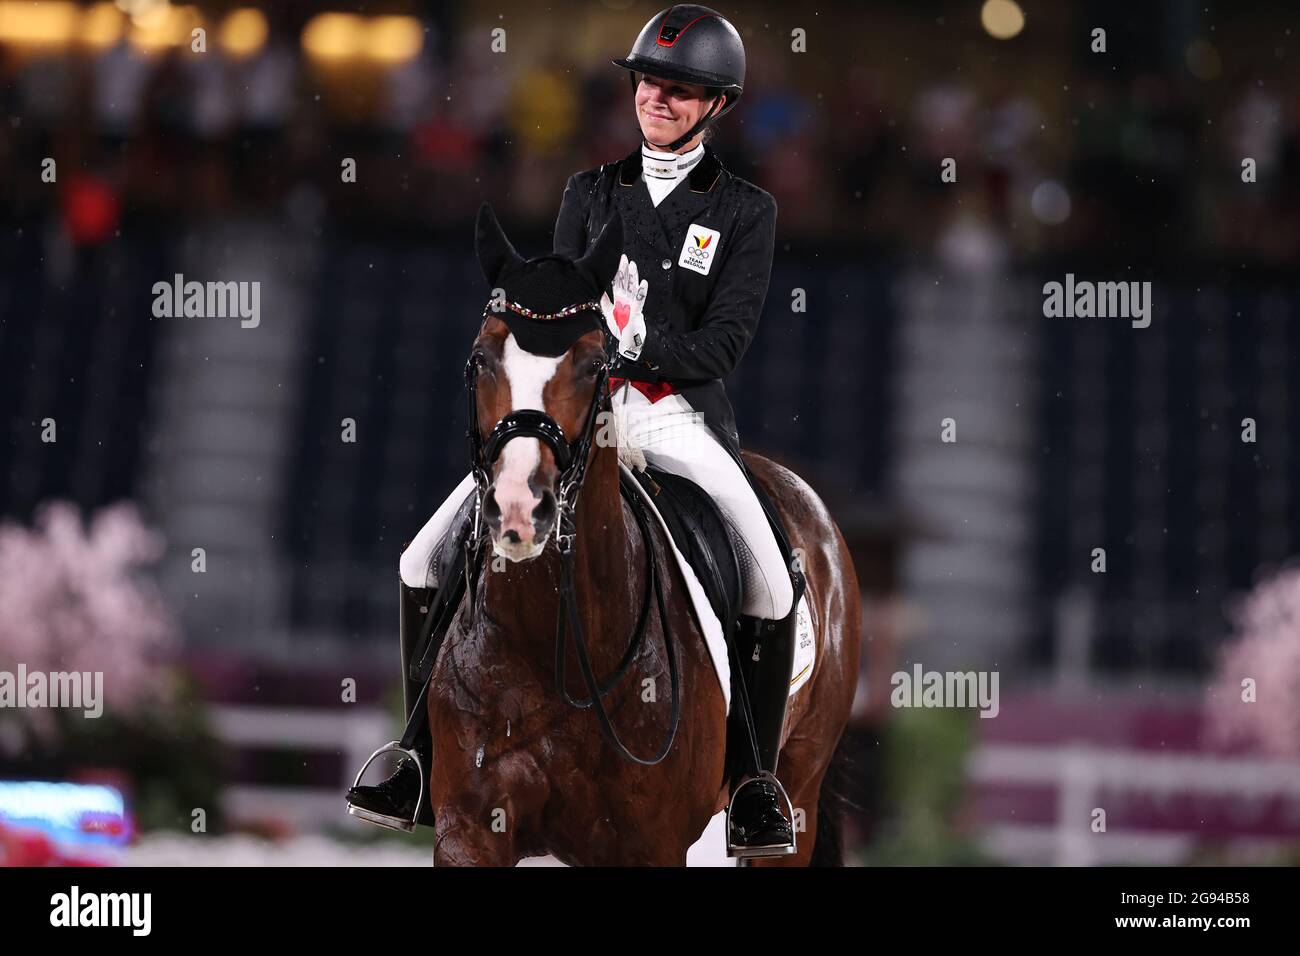 Belgian Equestrian dressage rider Larissa Pauluis and her horse Flambeau pictured in action during day one of the equestrian dressage event. Stock Photo